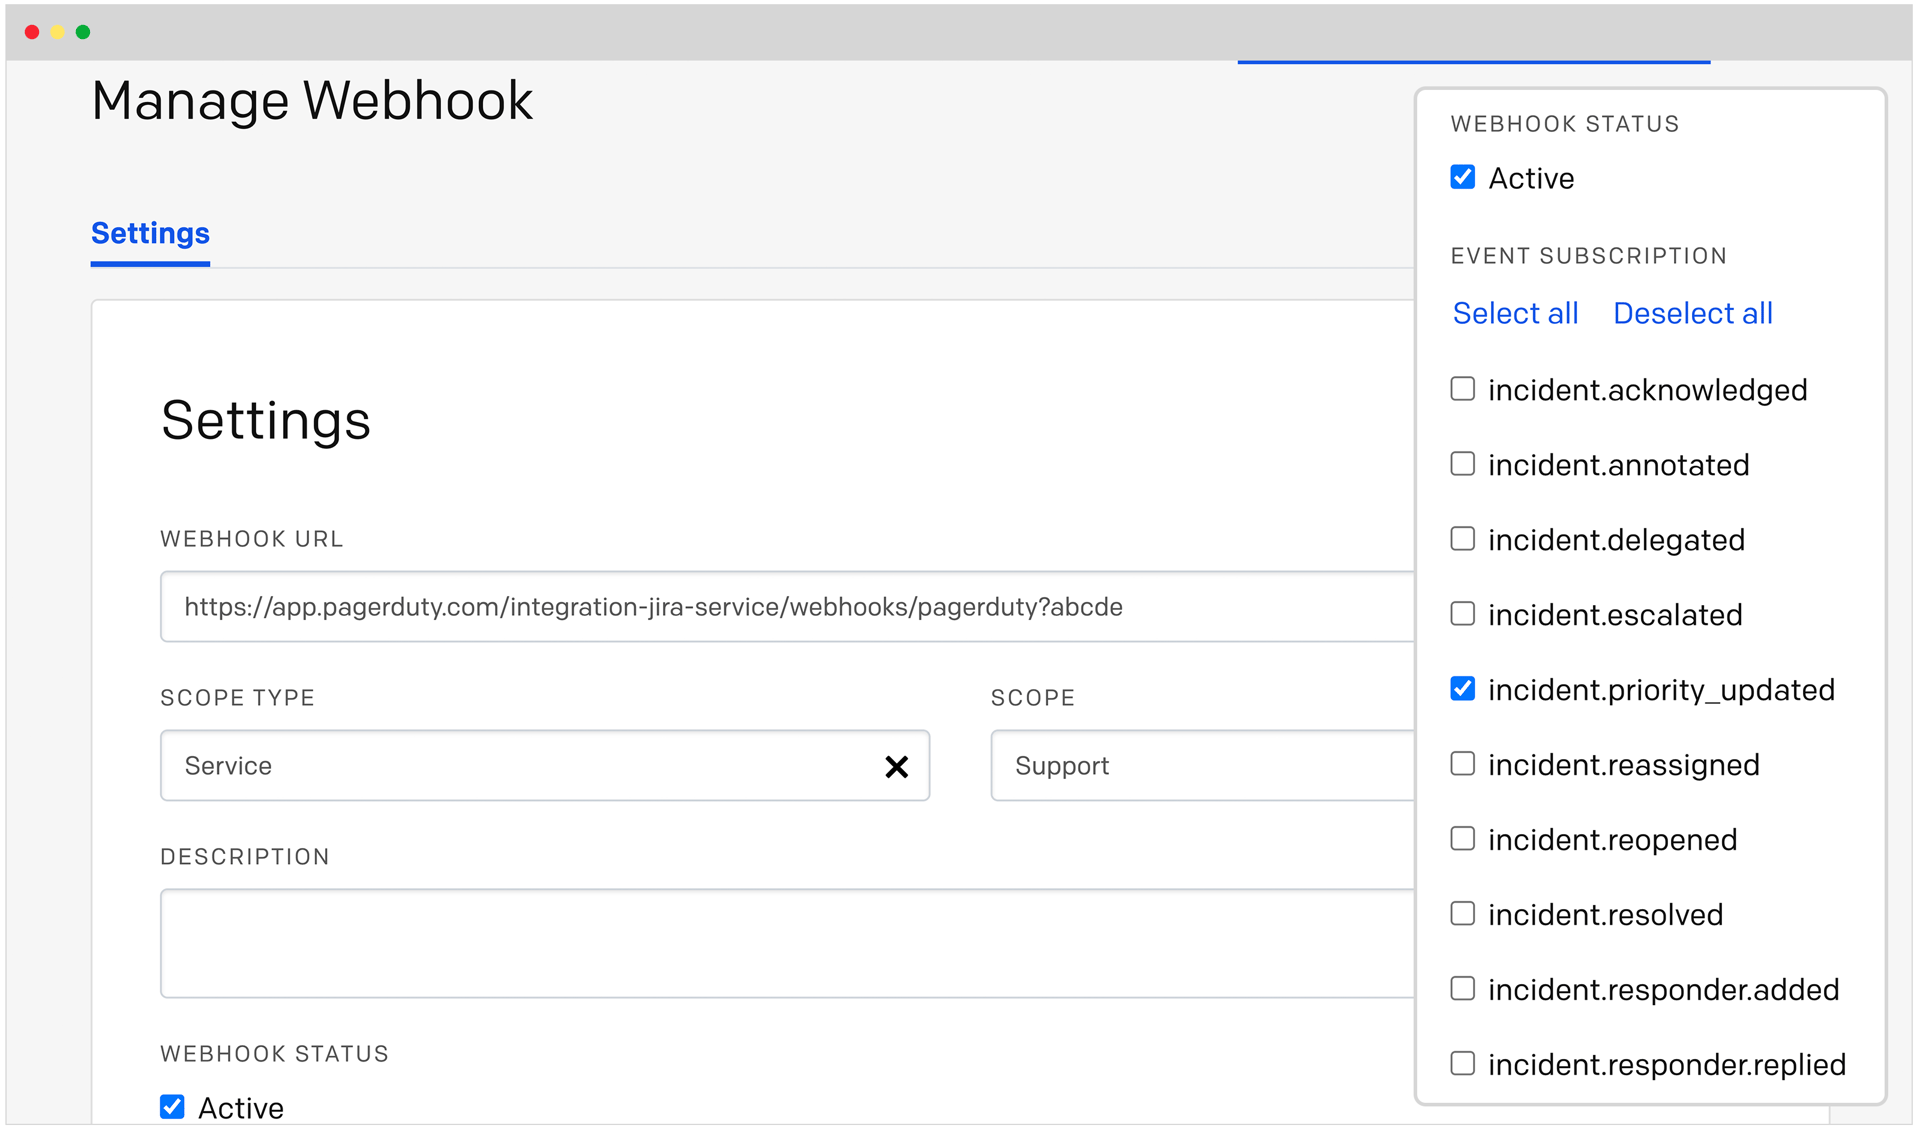 What's New in PagerDuty and PagerDuty Product Updates : Manage Webhooks V3